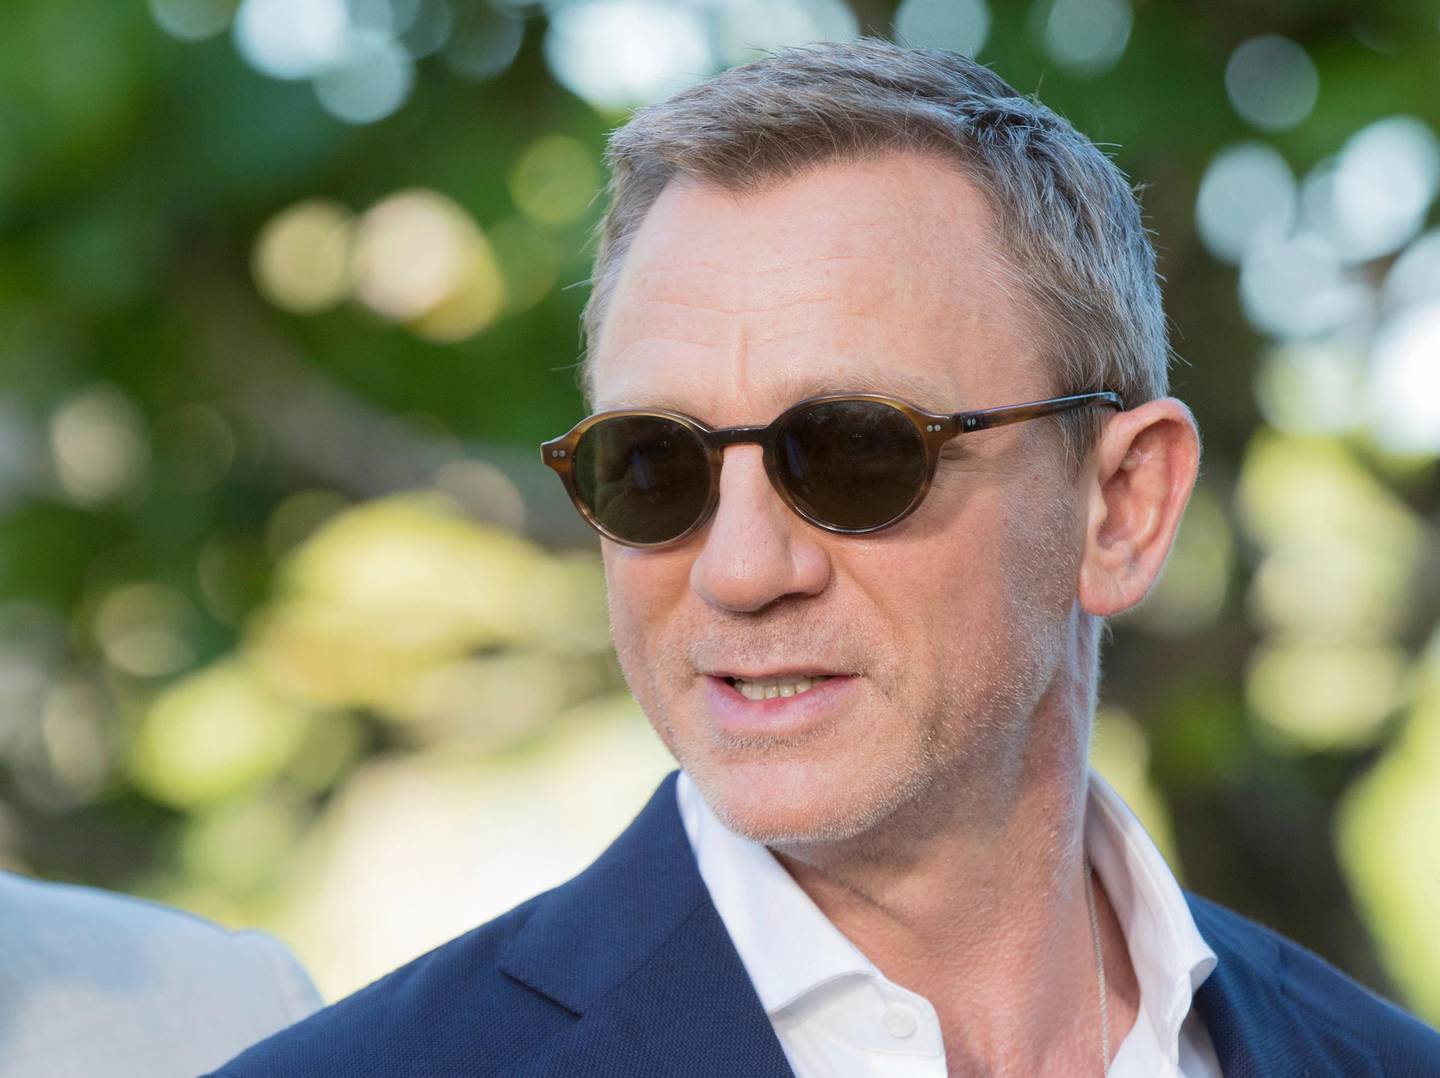 Actor Daniel Craig poses for photographers during the photo call of the latest installment of the James Bond film franchise, currently known as 'Bond 25', in Oracabessa, Jamaica, Thursday, April 25, 2019. (AP Photo/Leo Hudson)